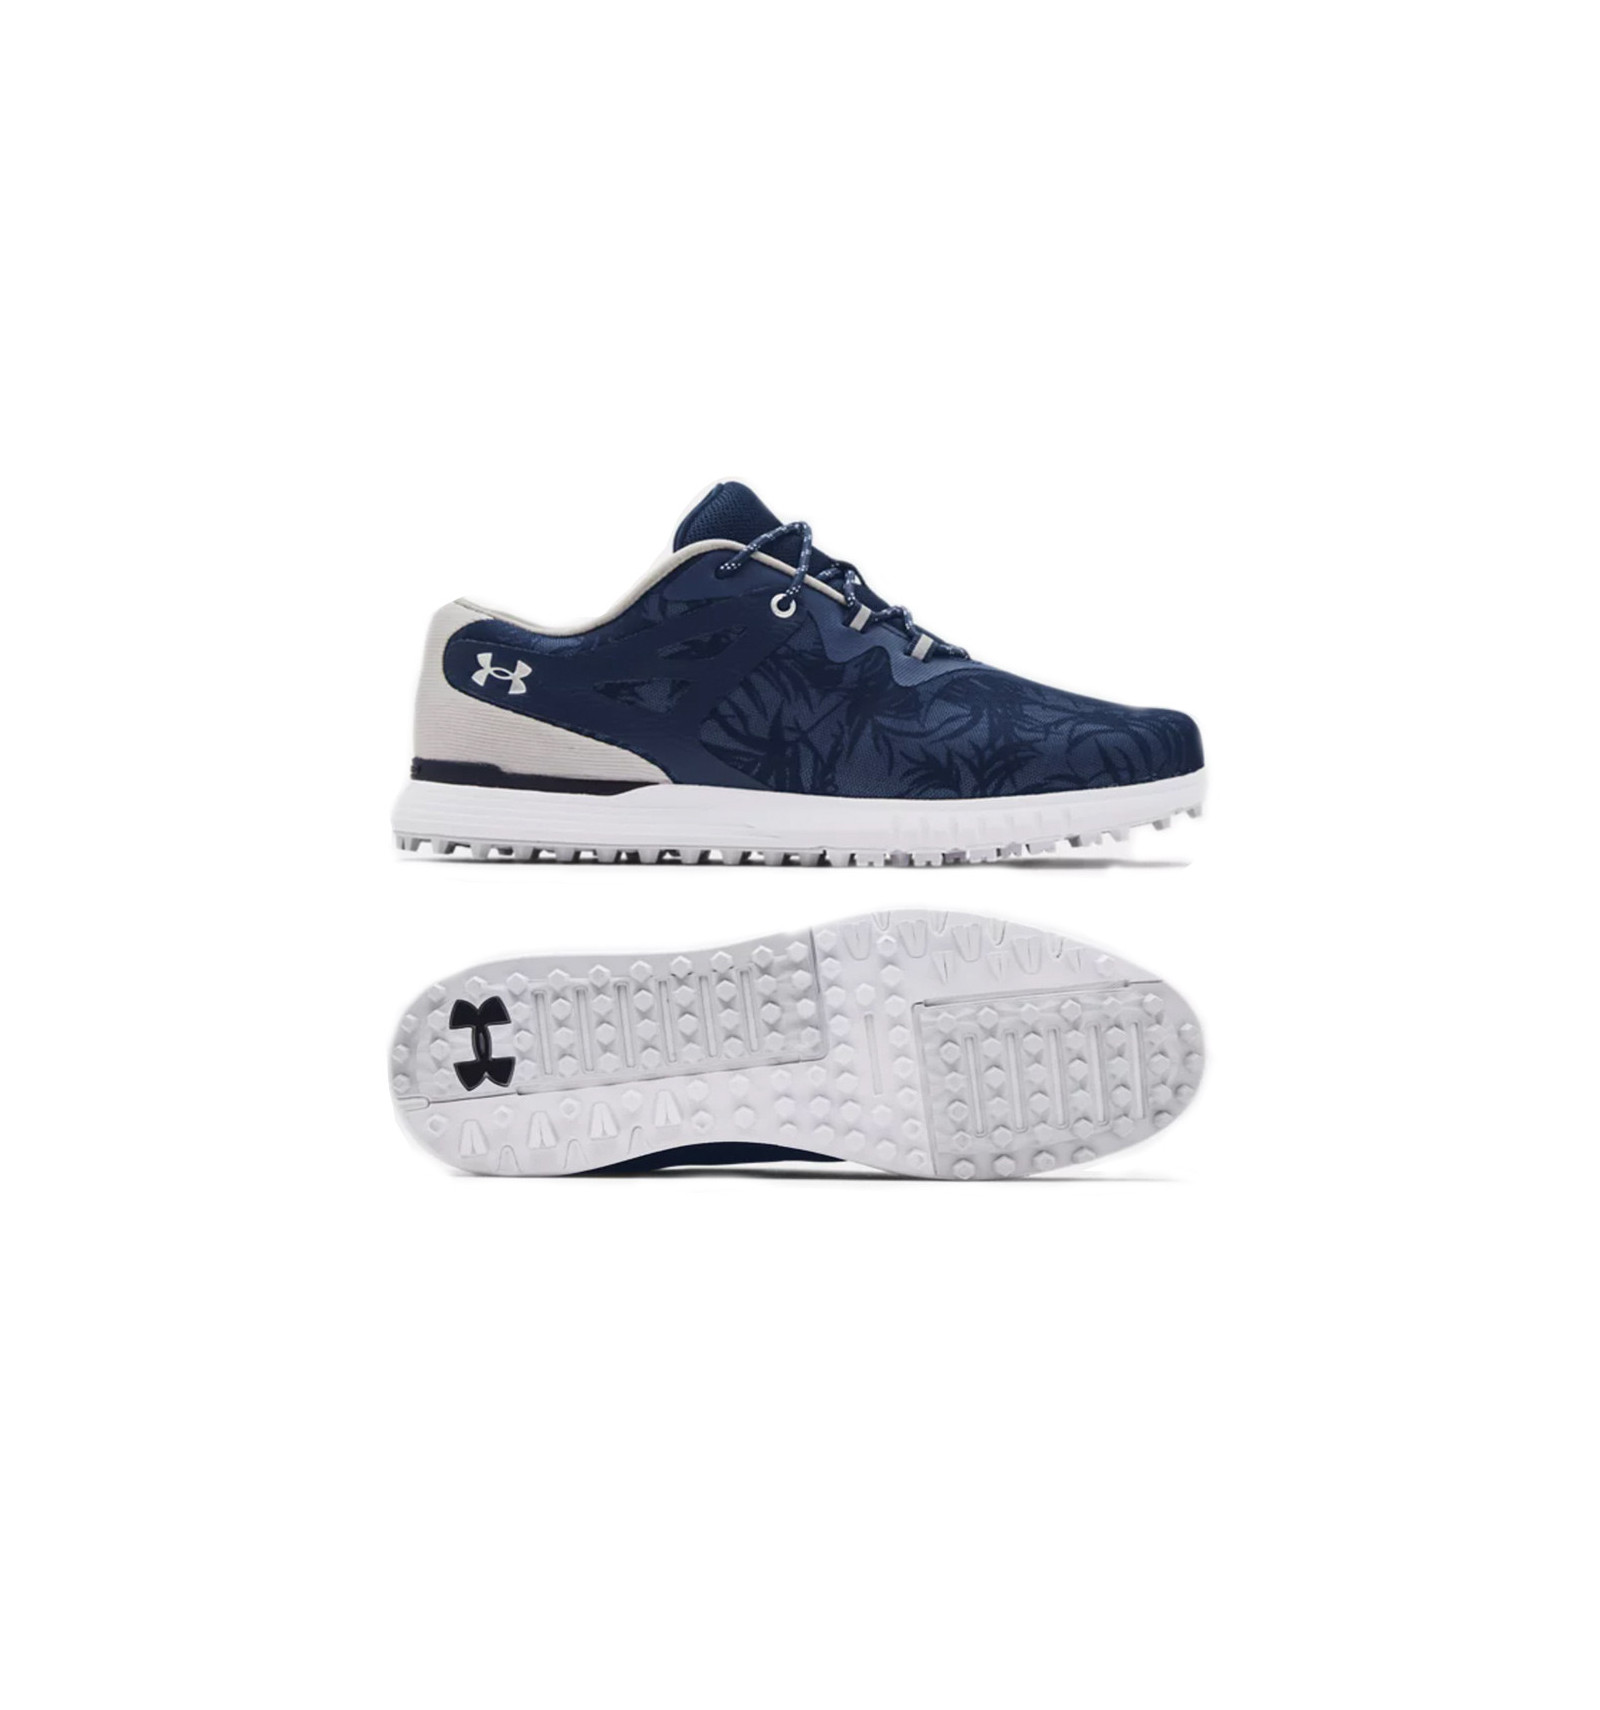 Chaussures Under Armour femme